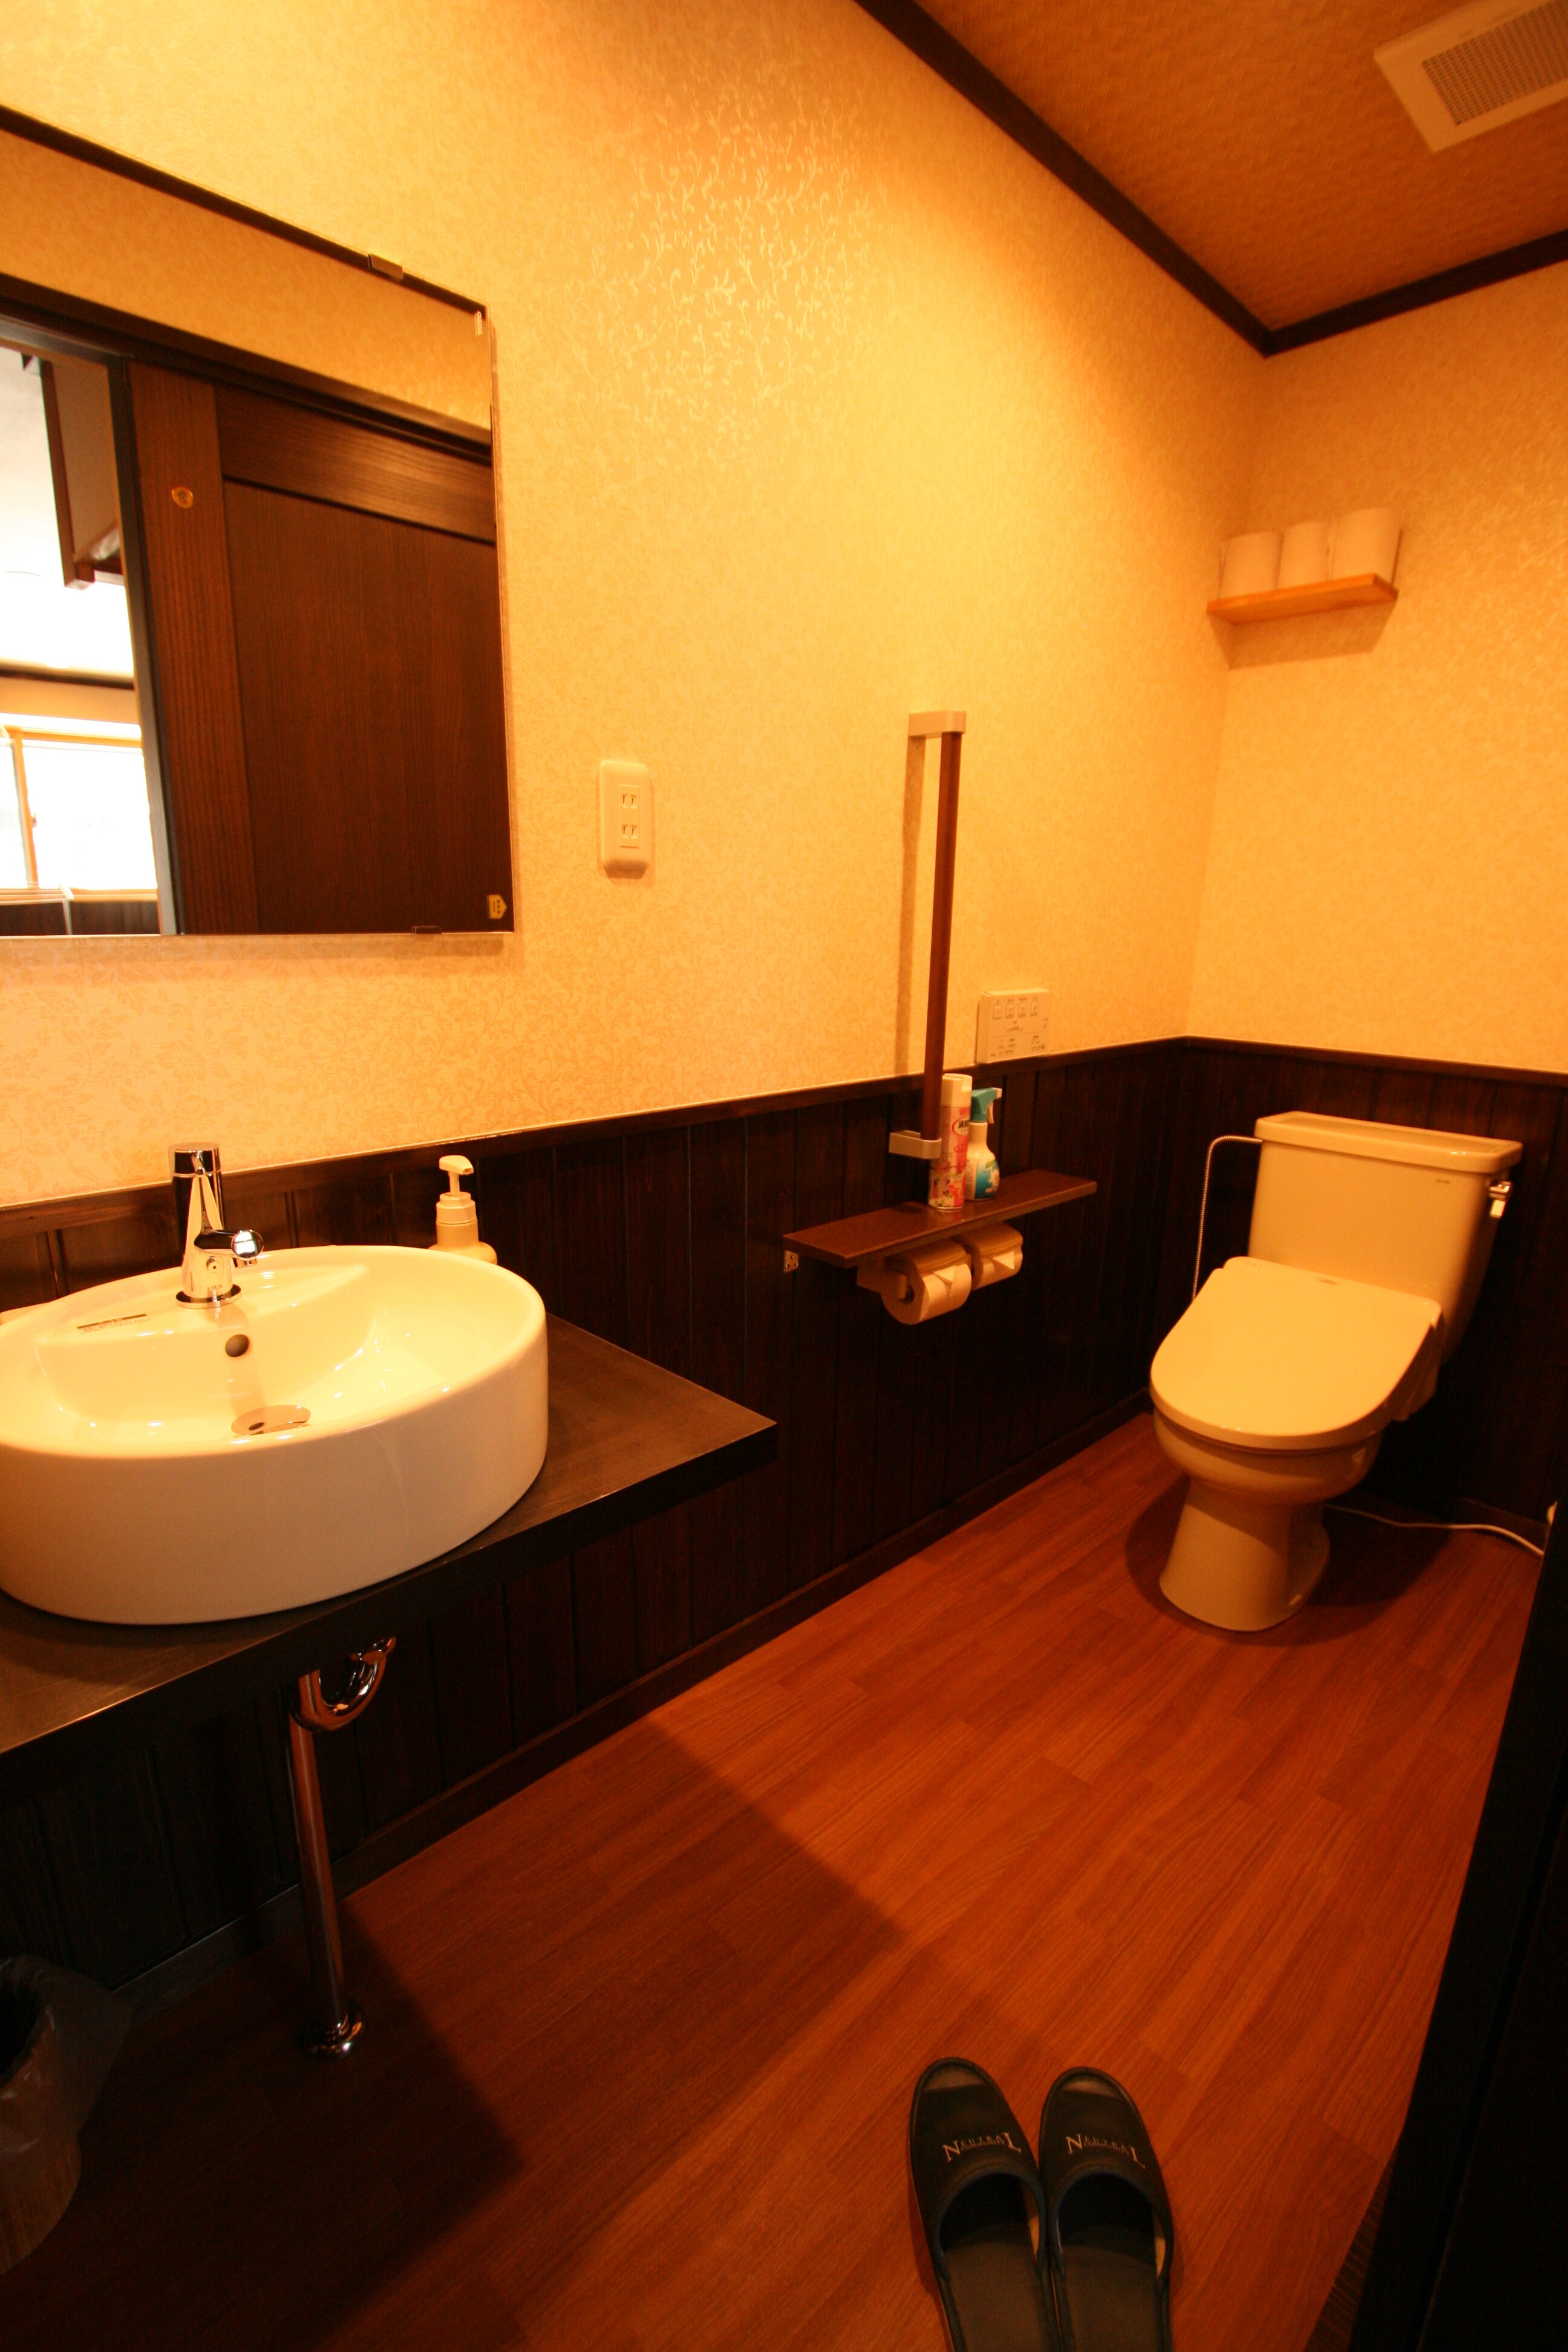 Newly established in January, R4! Twin low bed + 14 tatami mats Kotatsu, modern Japanese-style room [Special room 2nd floor only] 2 toilets and 2 washbasins